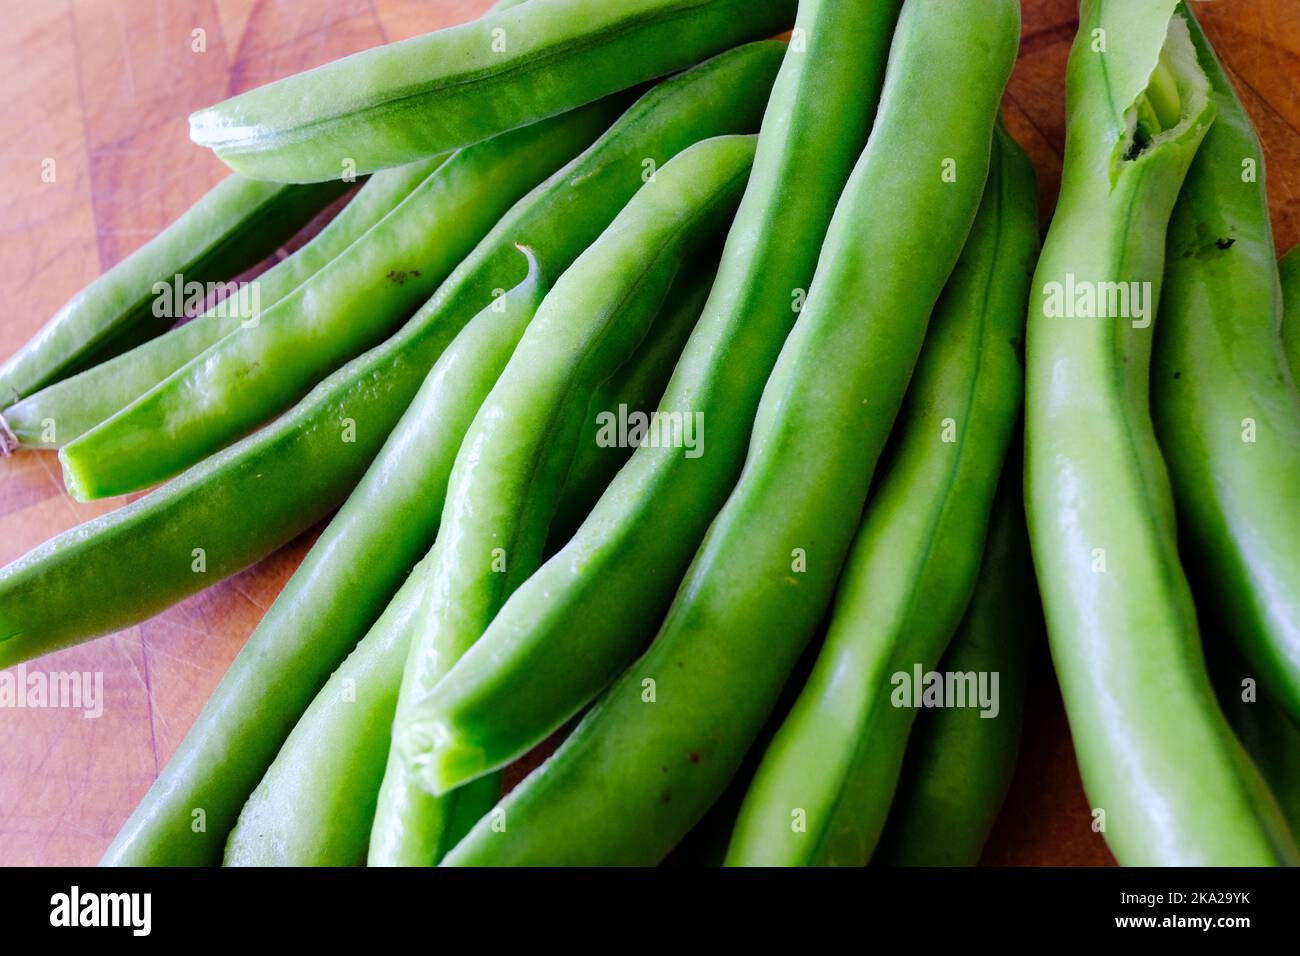 Freshly picked broad bean pods on a wooden chopping board - John Gollop Stock Photo